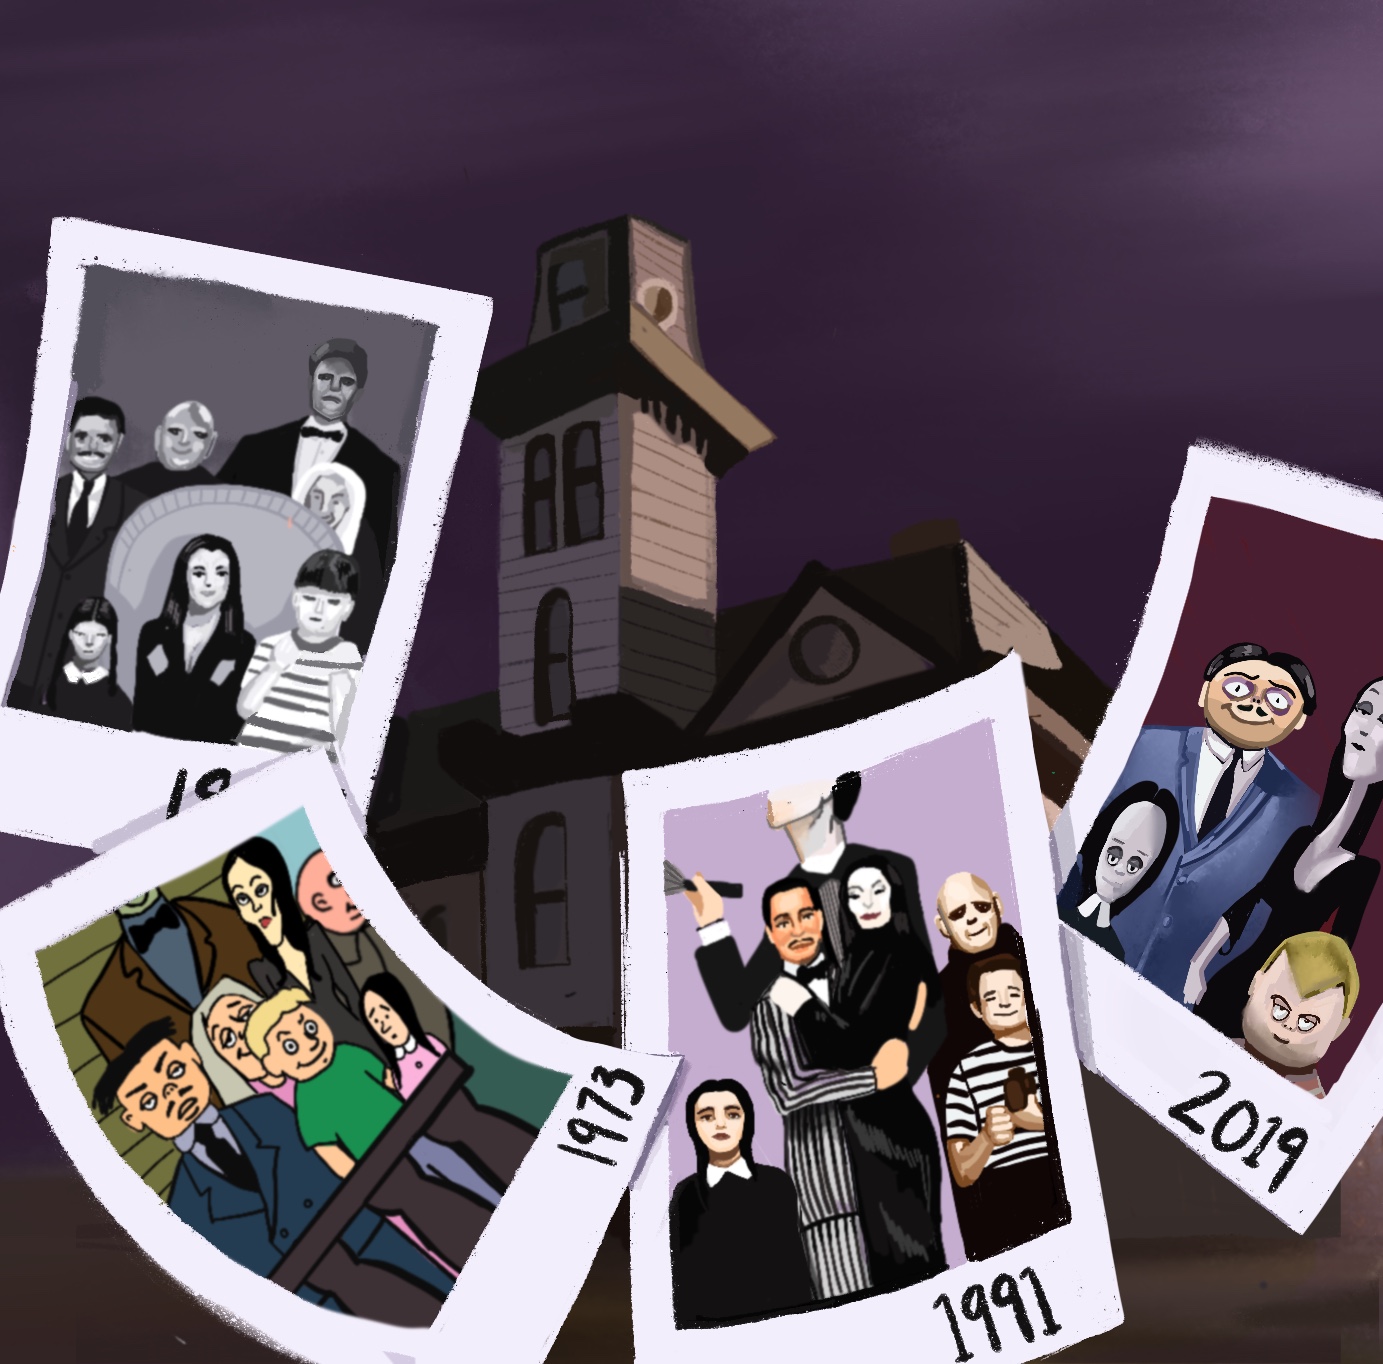 The Addams Familly